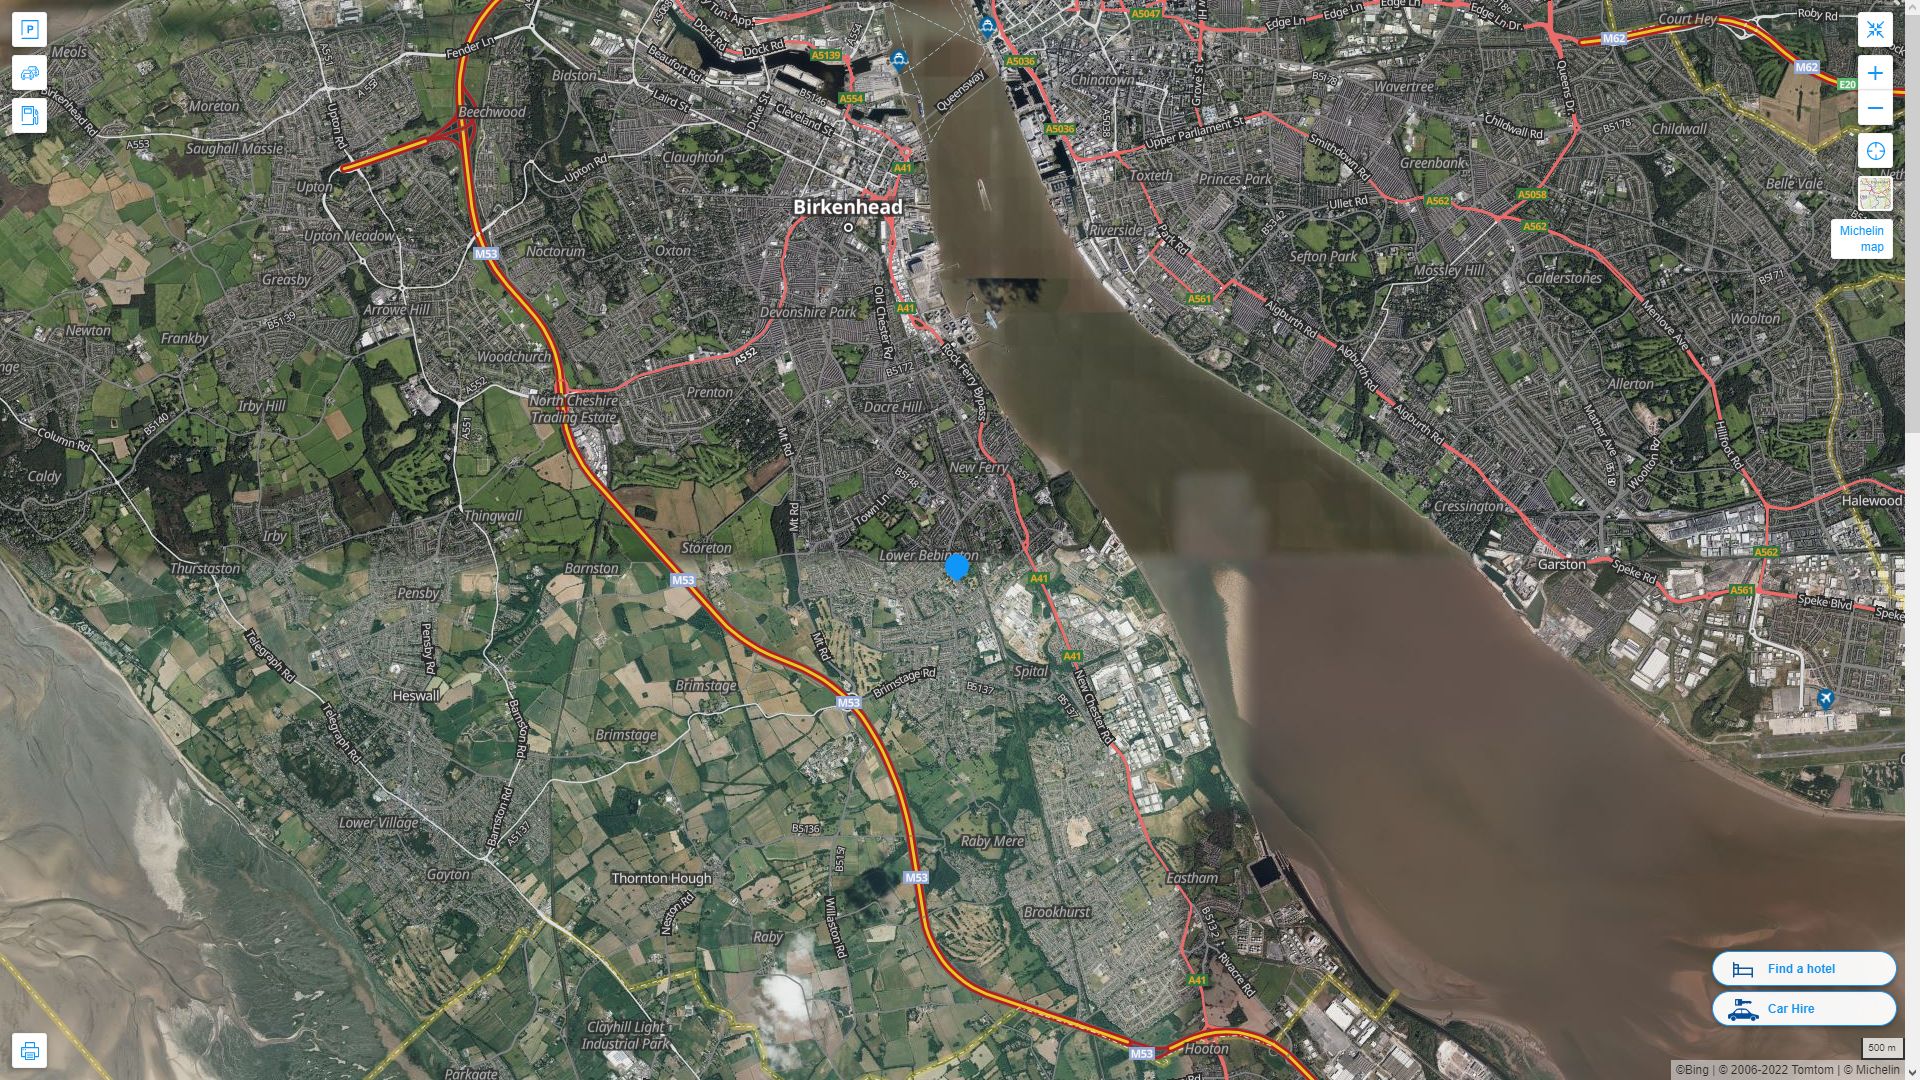 Bebington Highway and Road Map with Satellite View